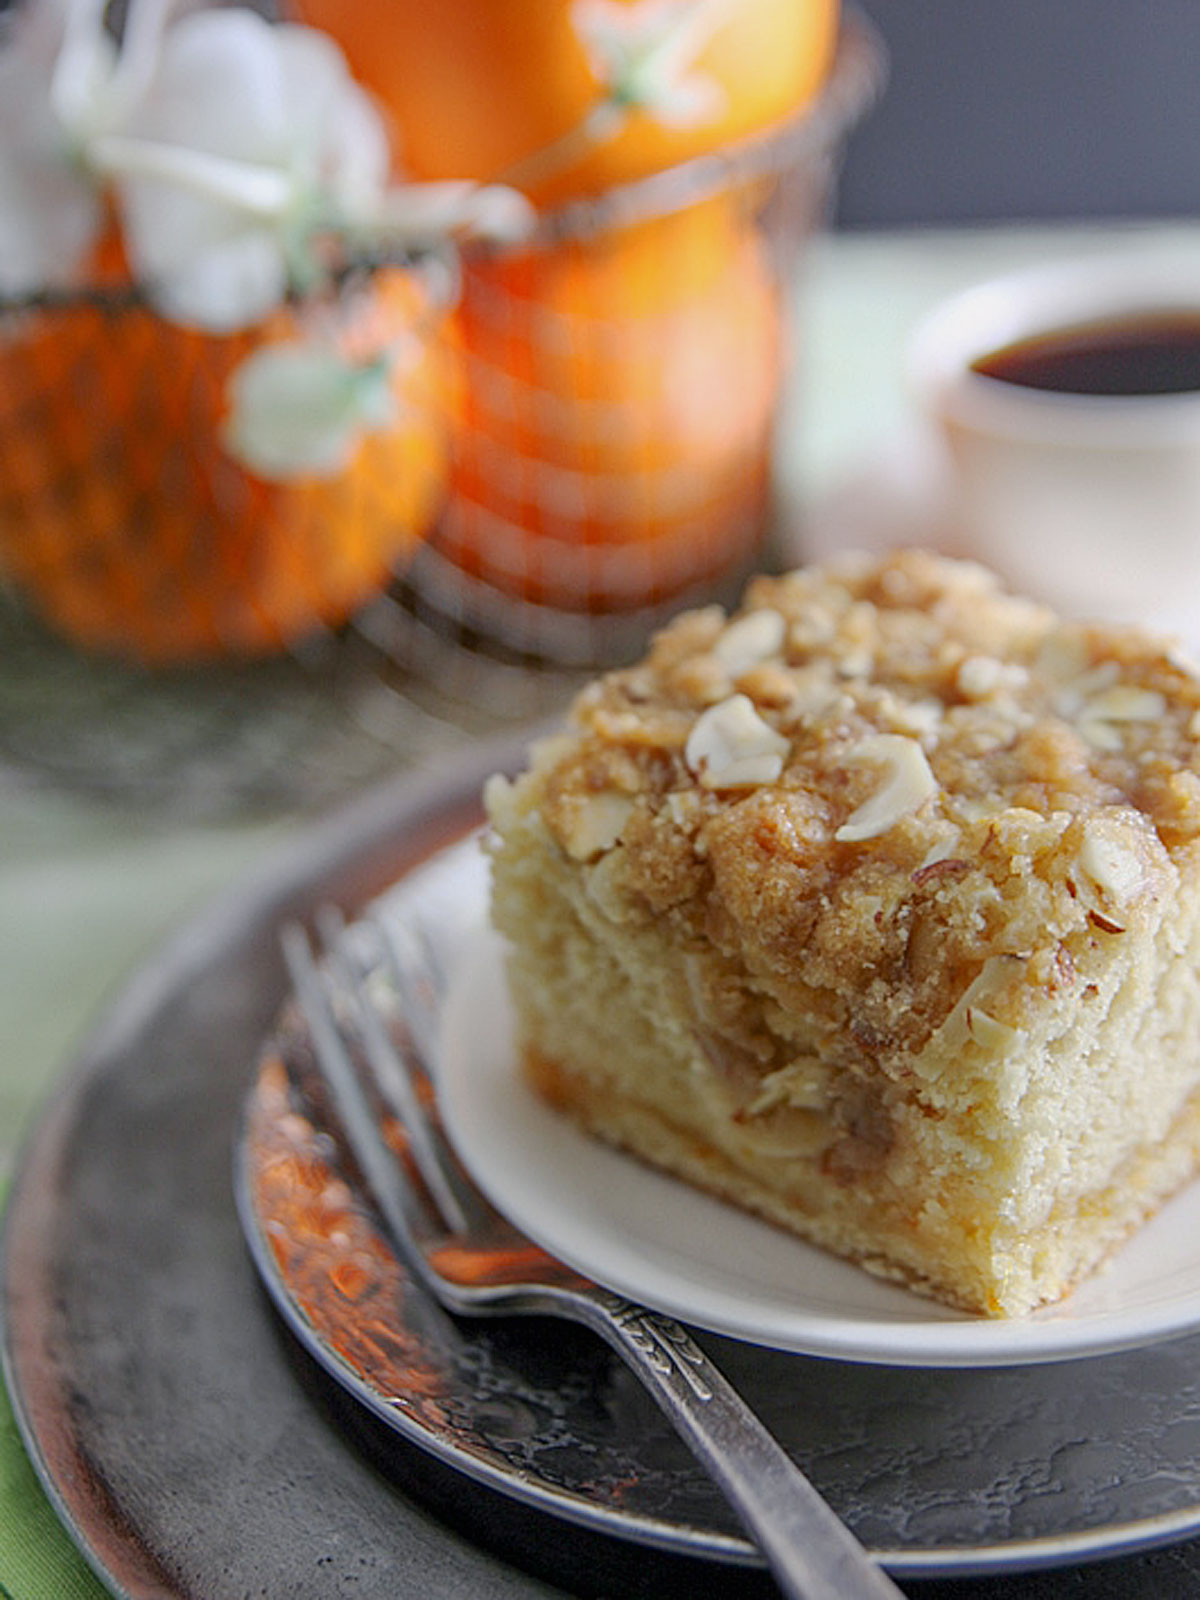 Orange Marmalade Coffee Cake with streusel topping and fresh oranges in the background.